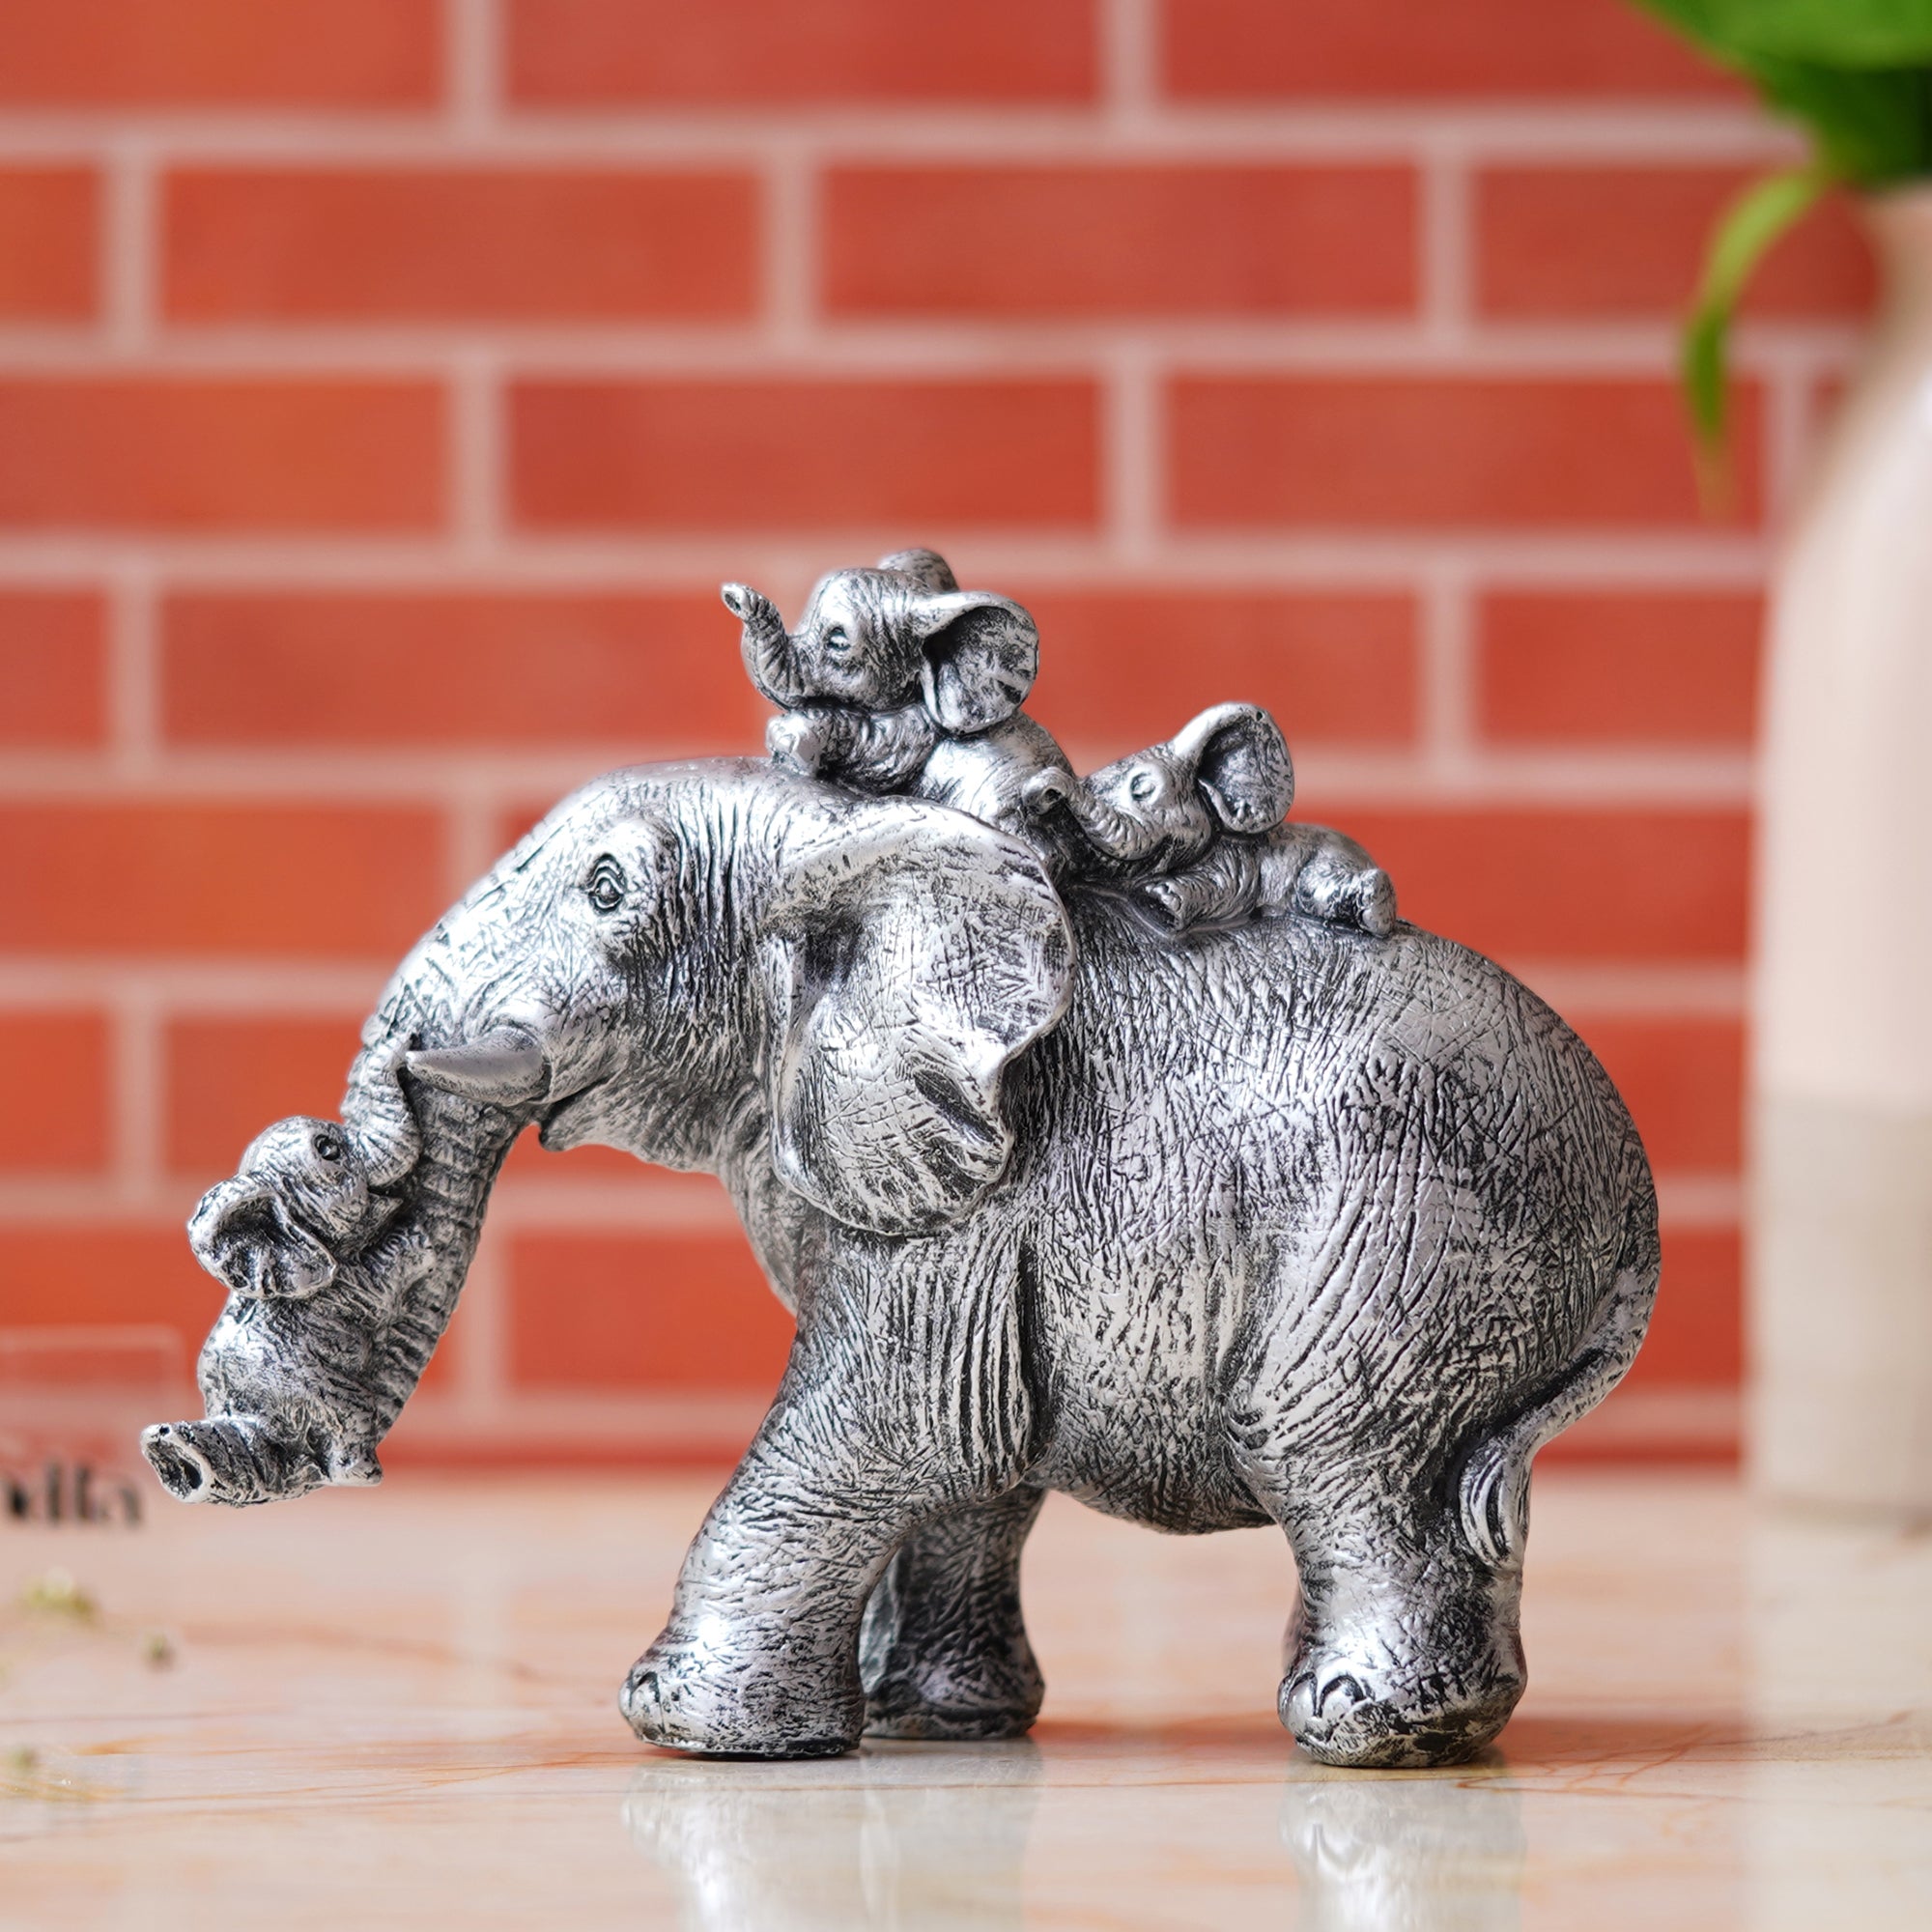 Cute Silver Elephant Statue Carries Three Calves on Its Back and Trunk 1